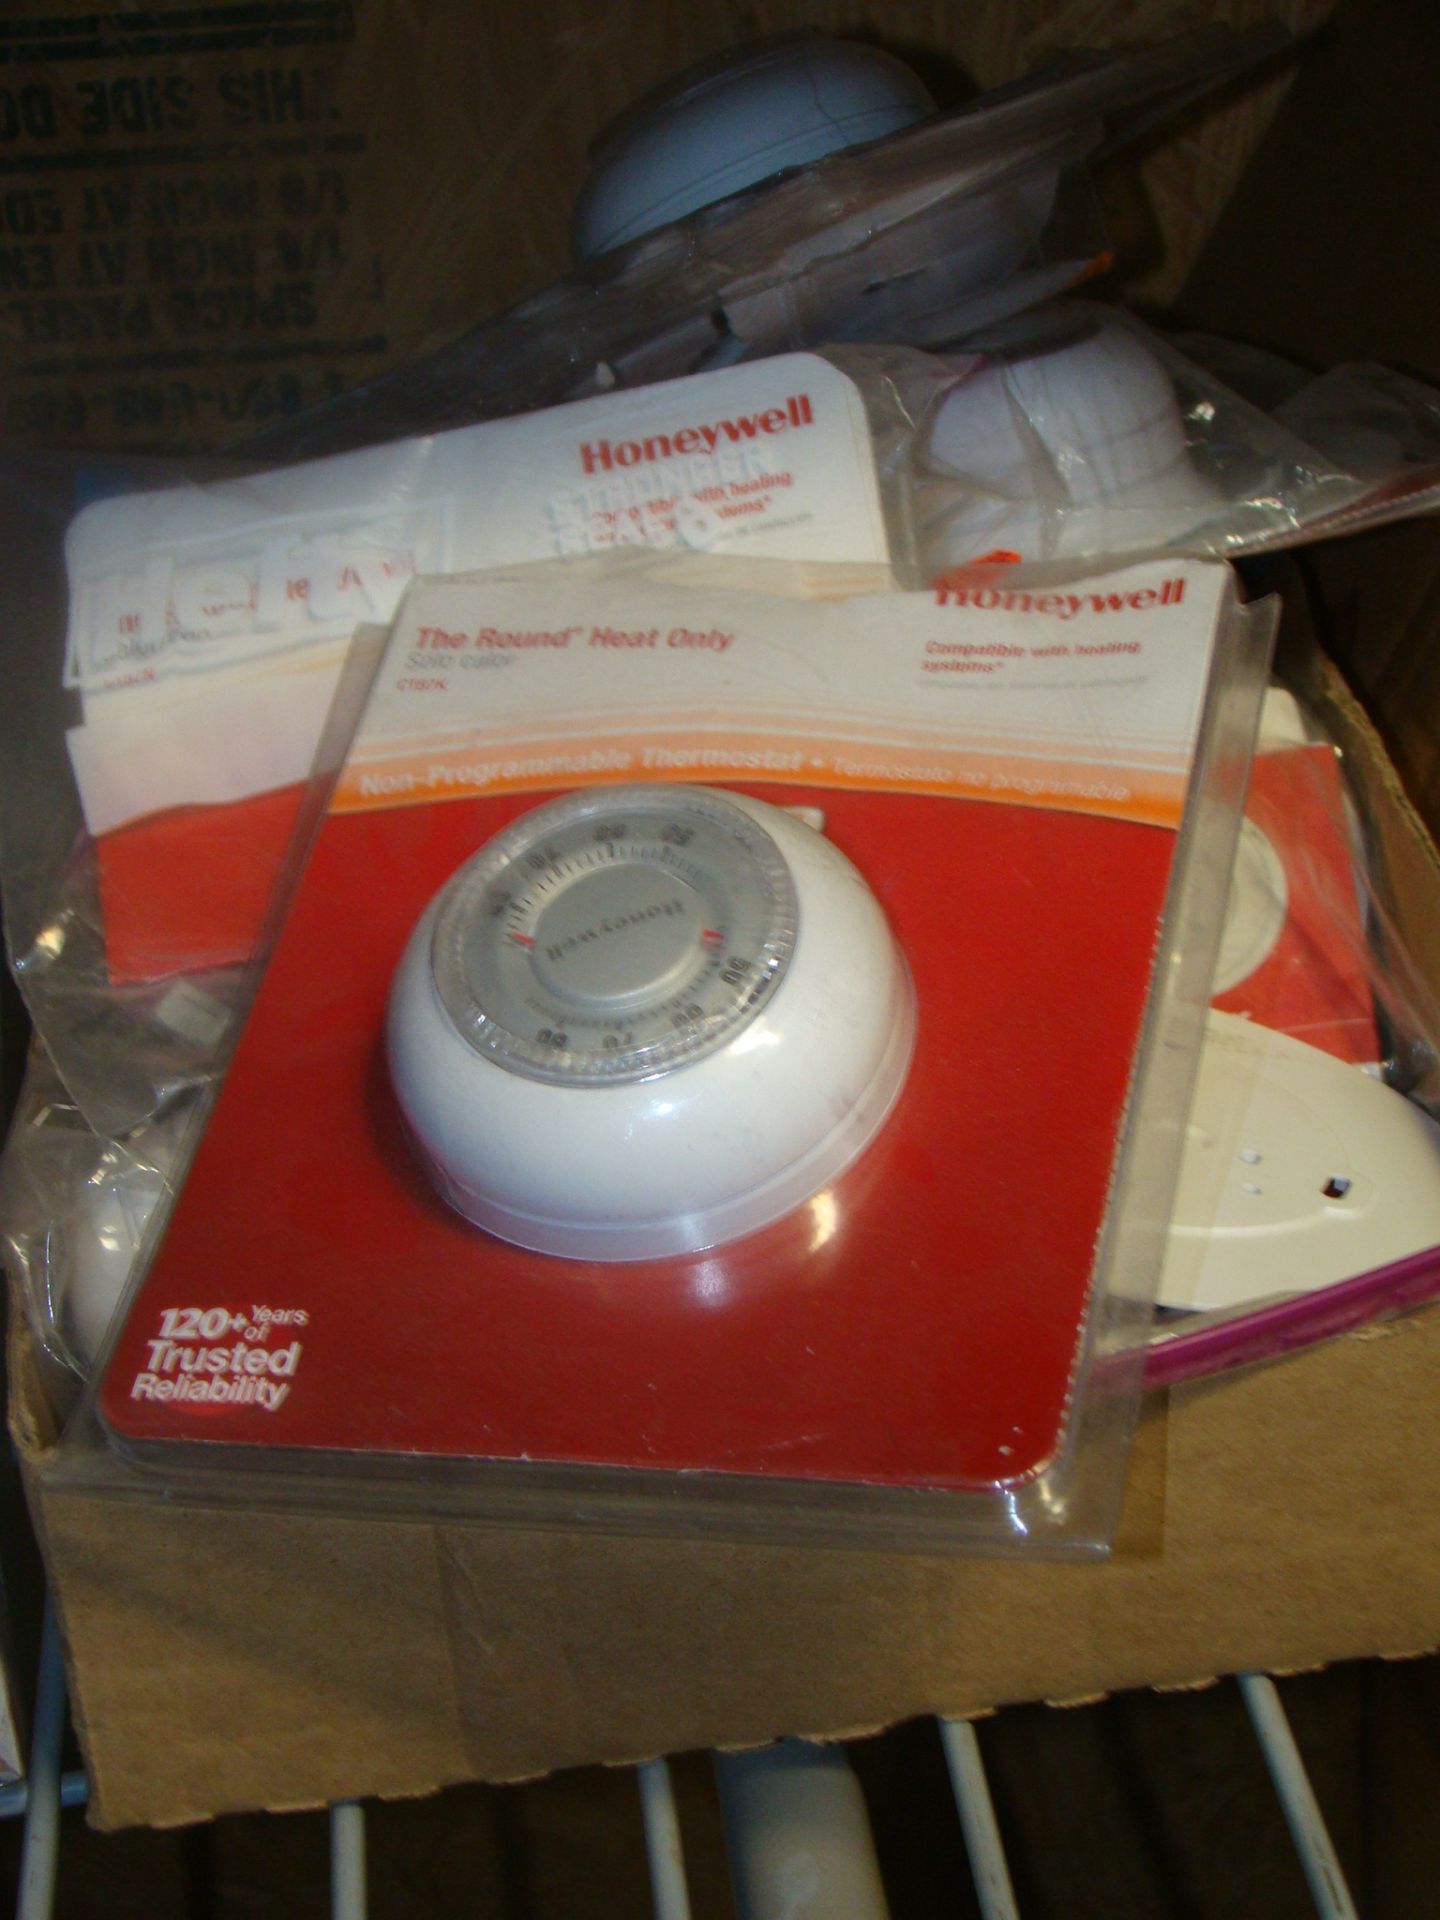 Lot of Honeywell Round Heat only thermostat